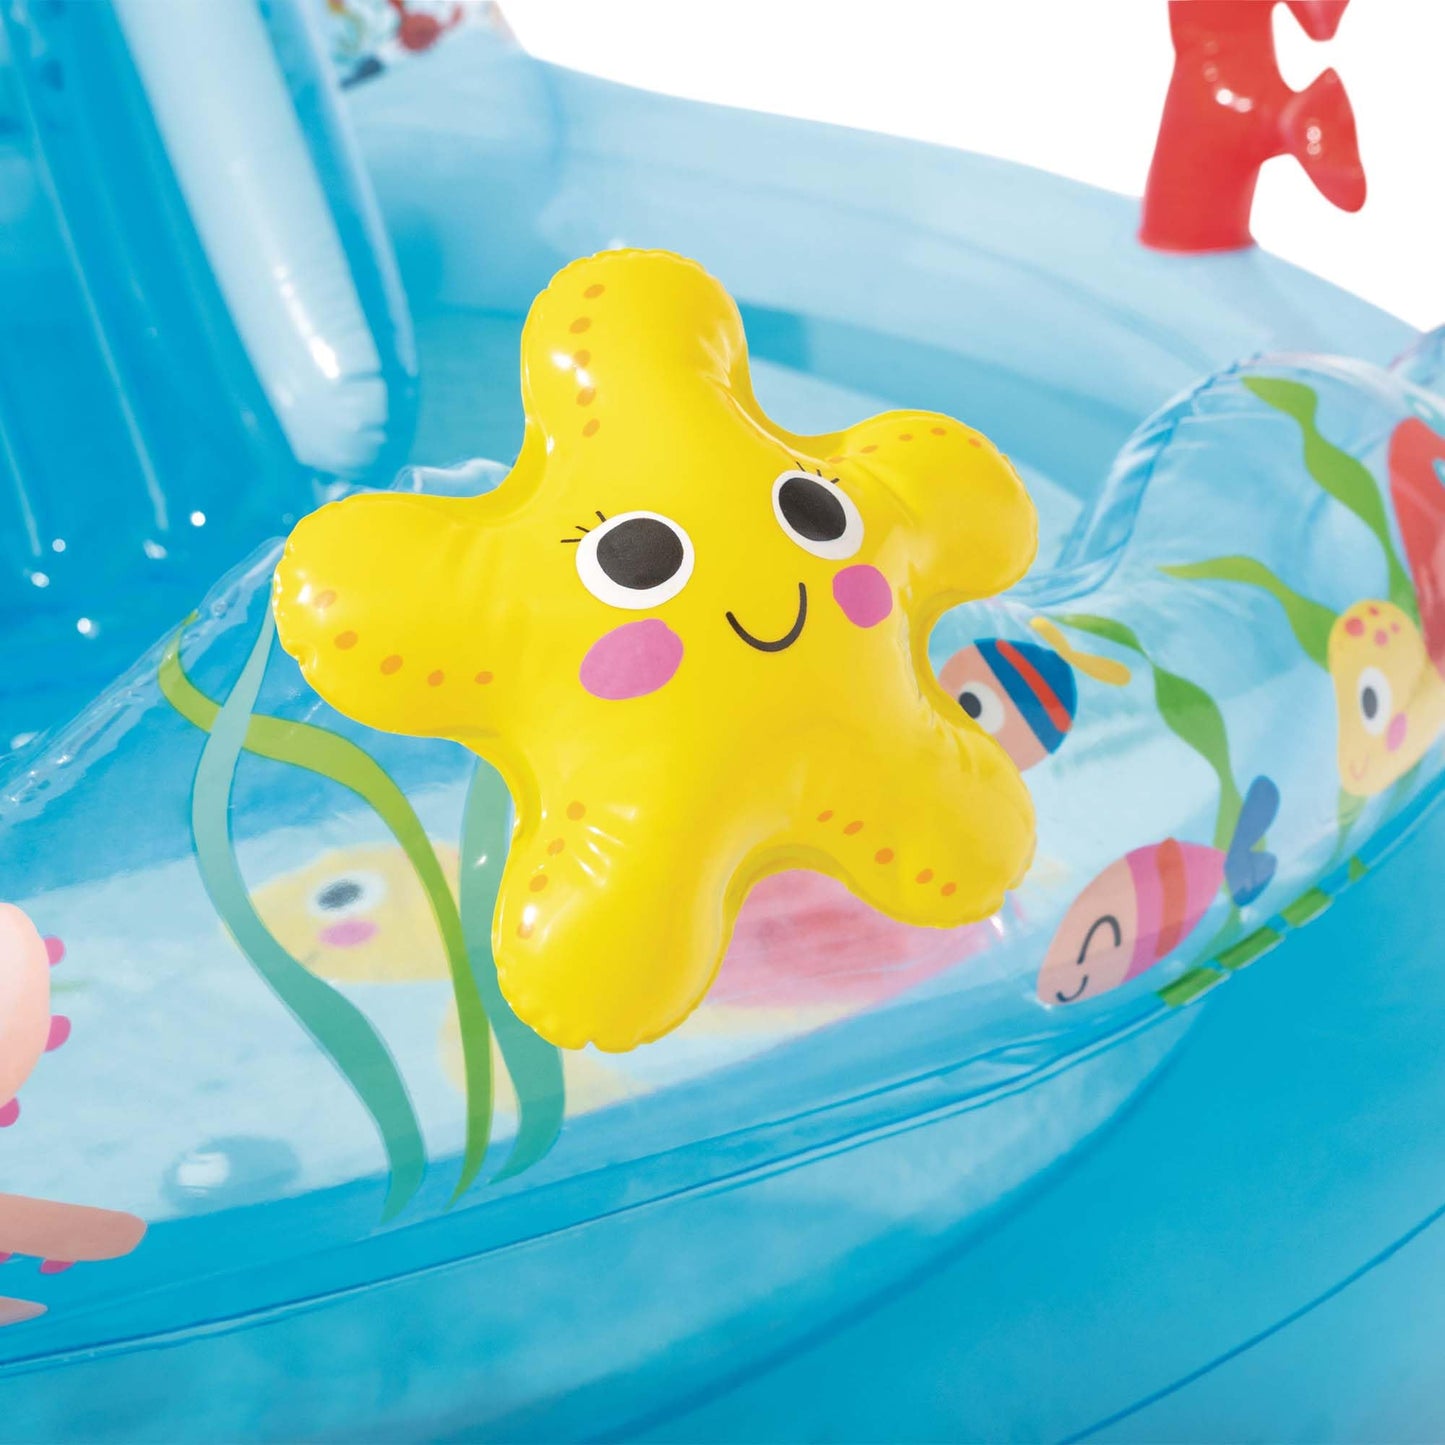 Intex Under The Sea Play Center, Inflated Size: 3.10m x 1.93m x 71cm